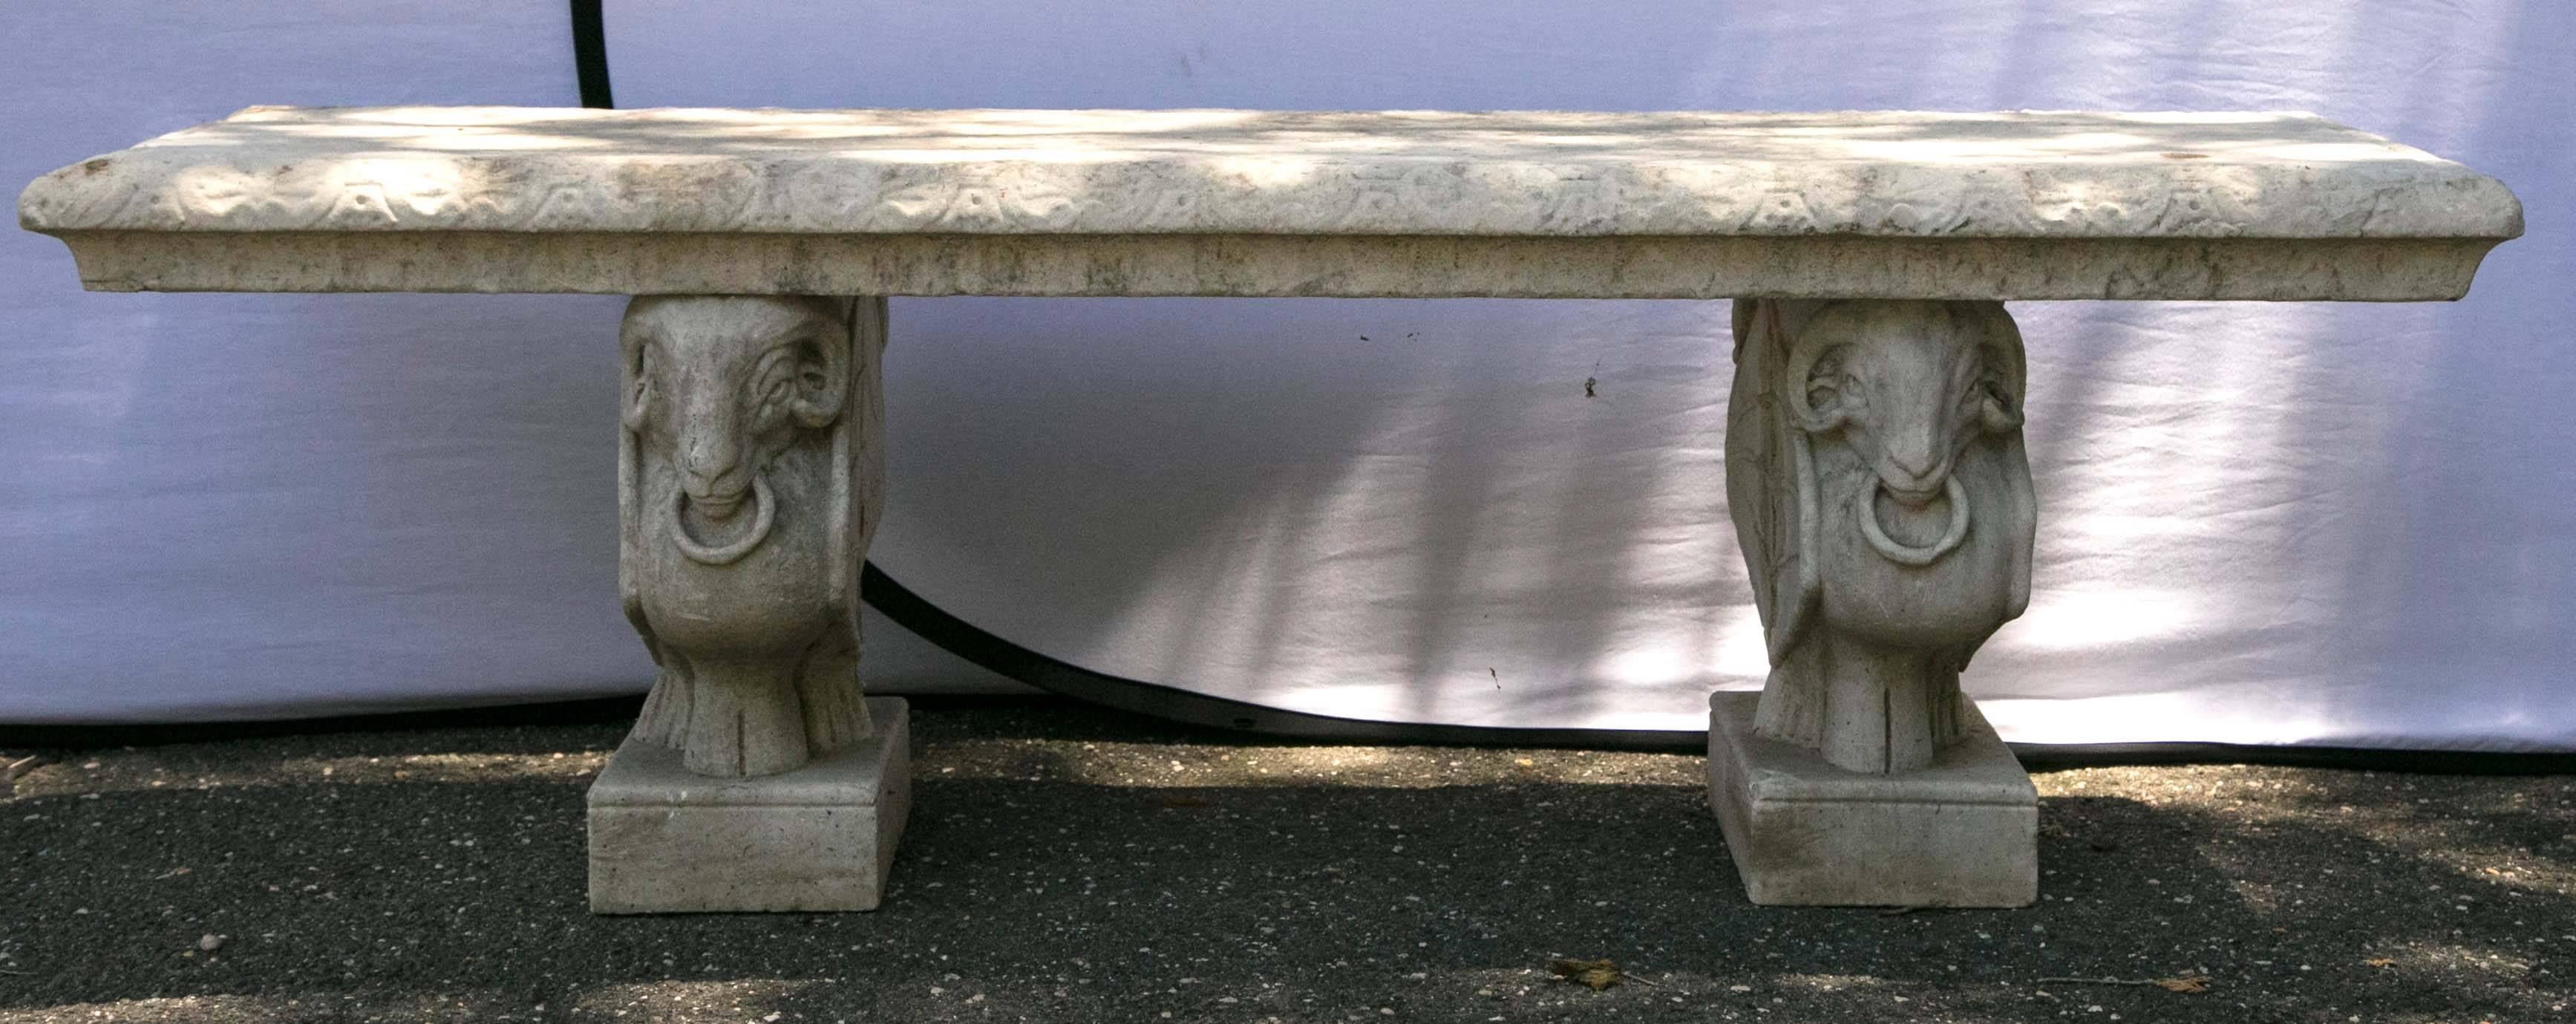 marble bench outdoor